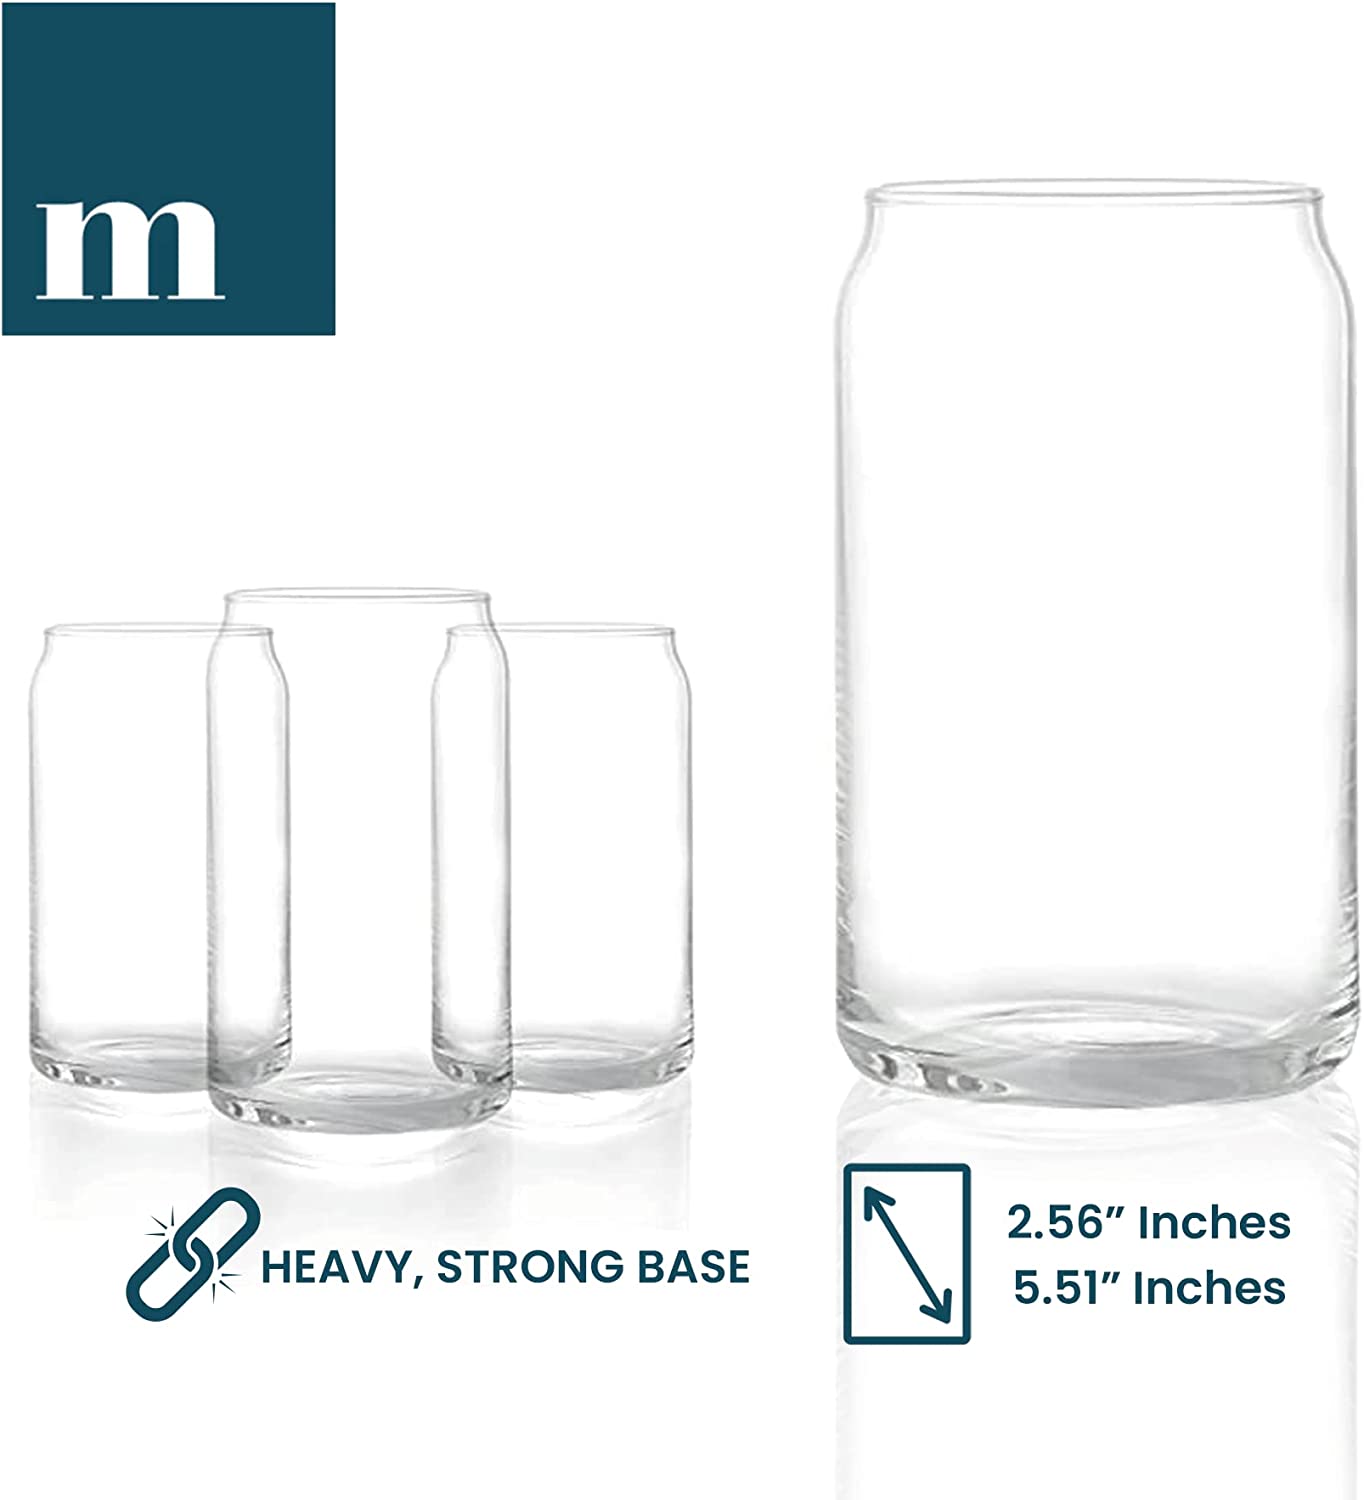 The Best-Selling Vitever Beer Can Drinking Glasses Is an Editor